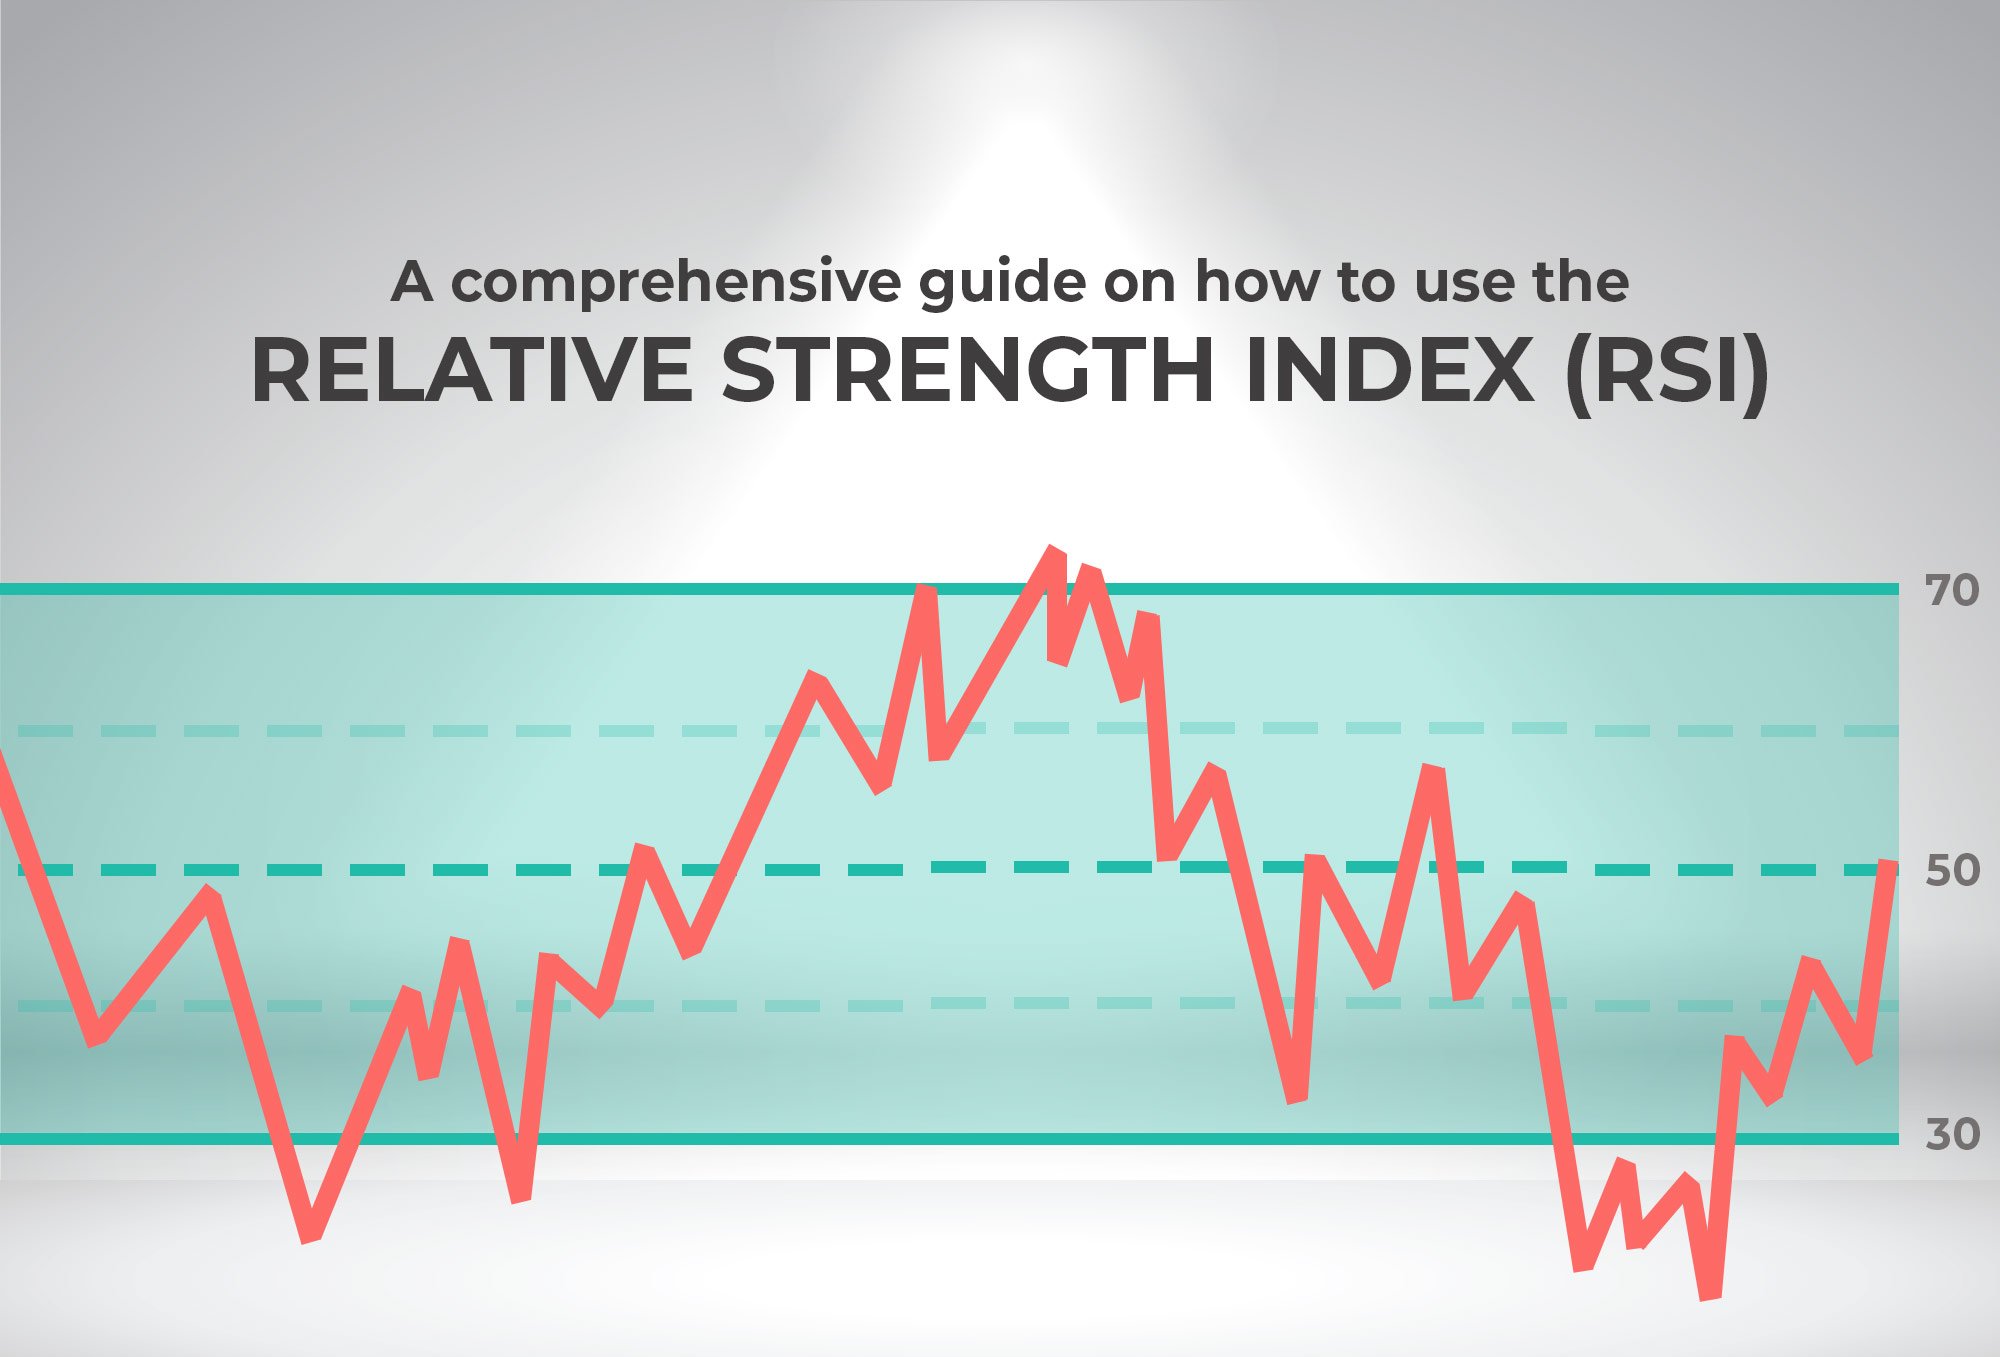 A comprehensive guide on how to use the Relative Strength Index (RSI